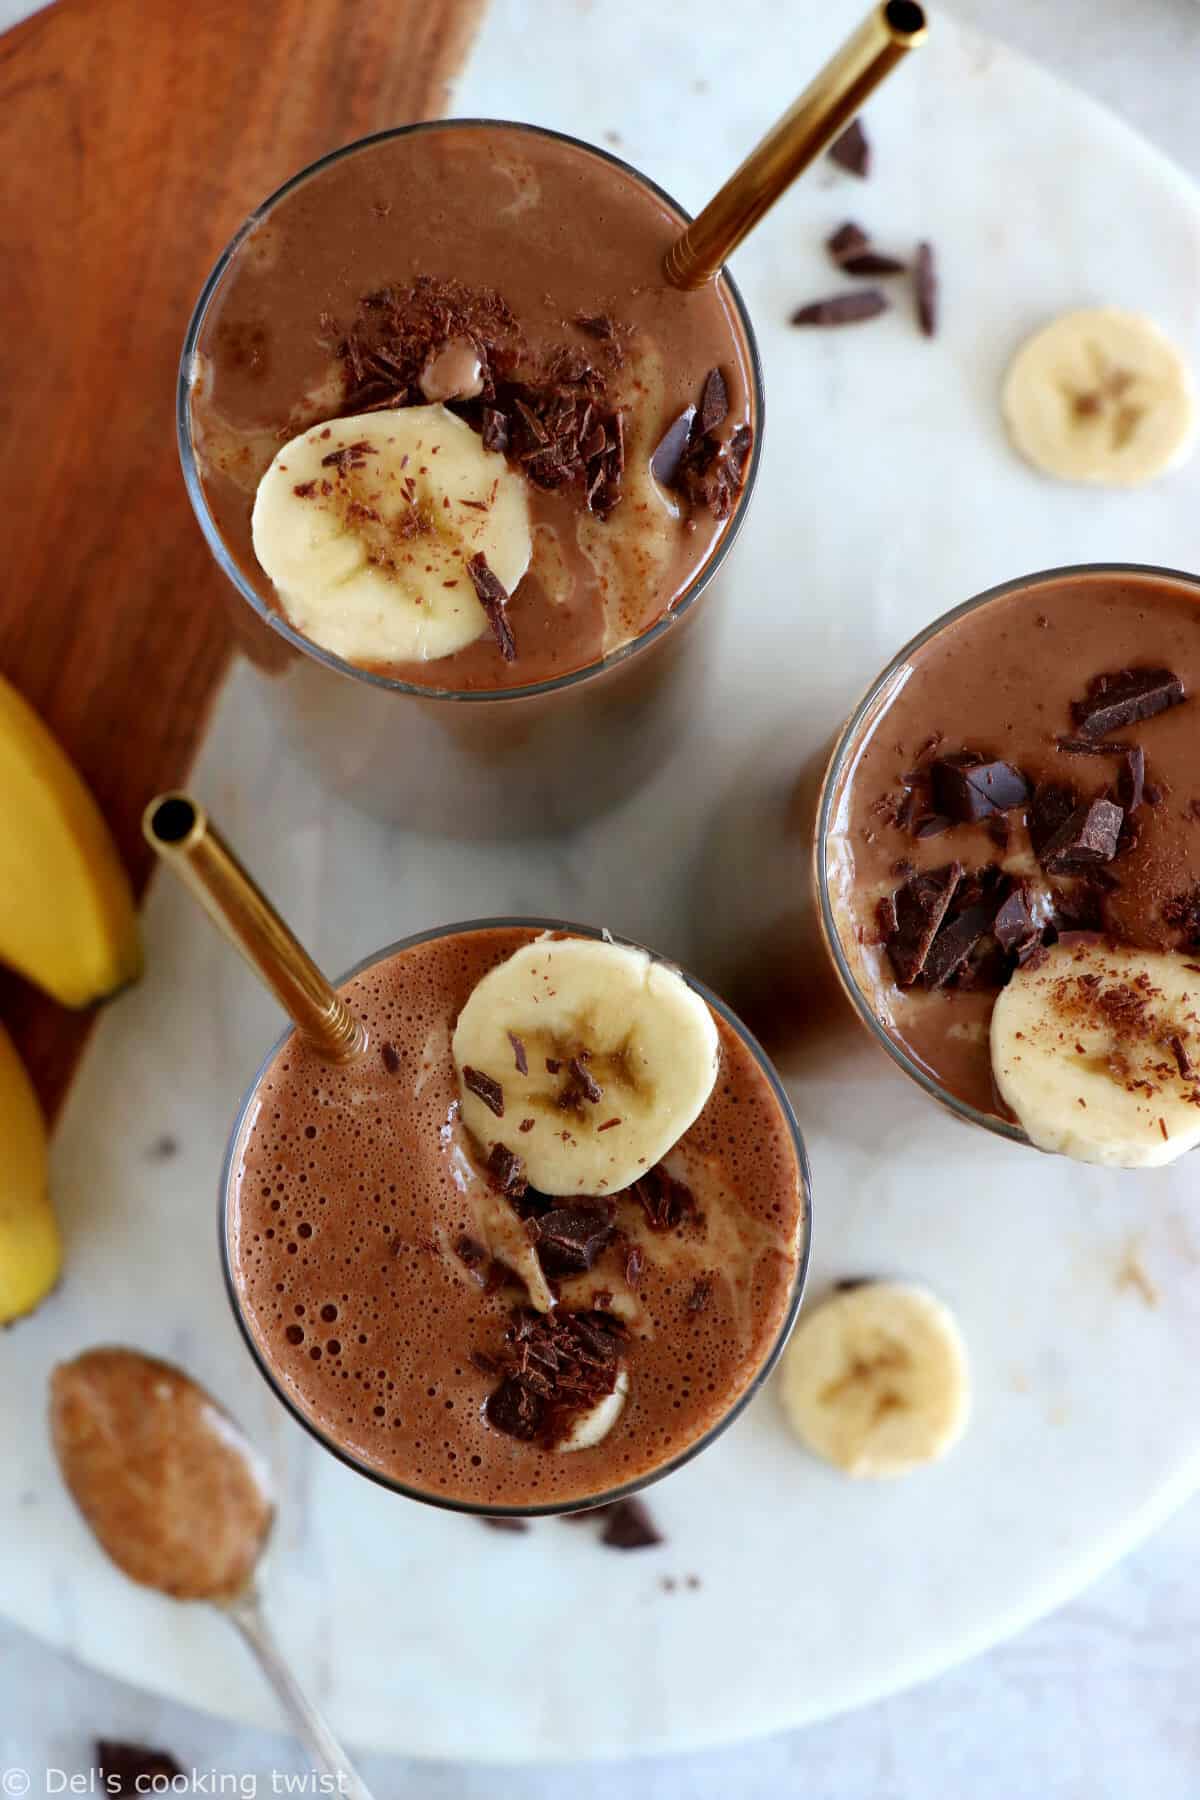 This 5-ingredient chocolate almond banana smoothie is rich, deliciously creamy and perfectly healthy.